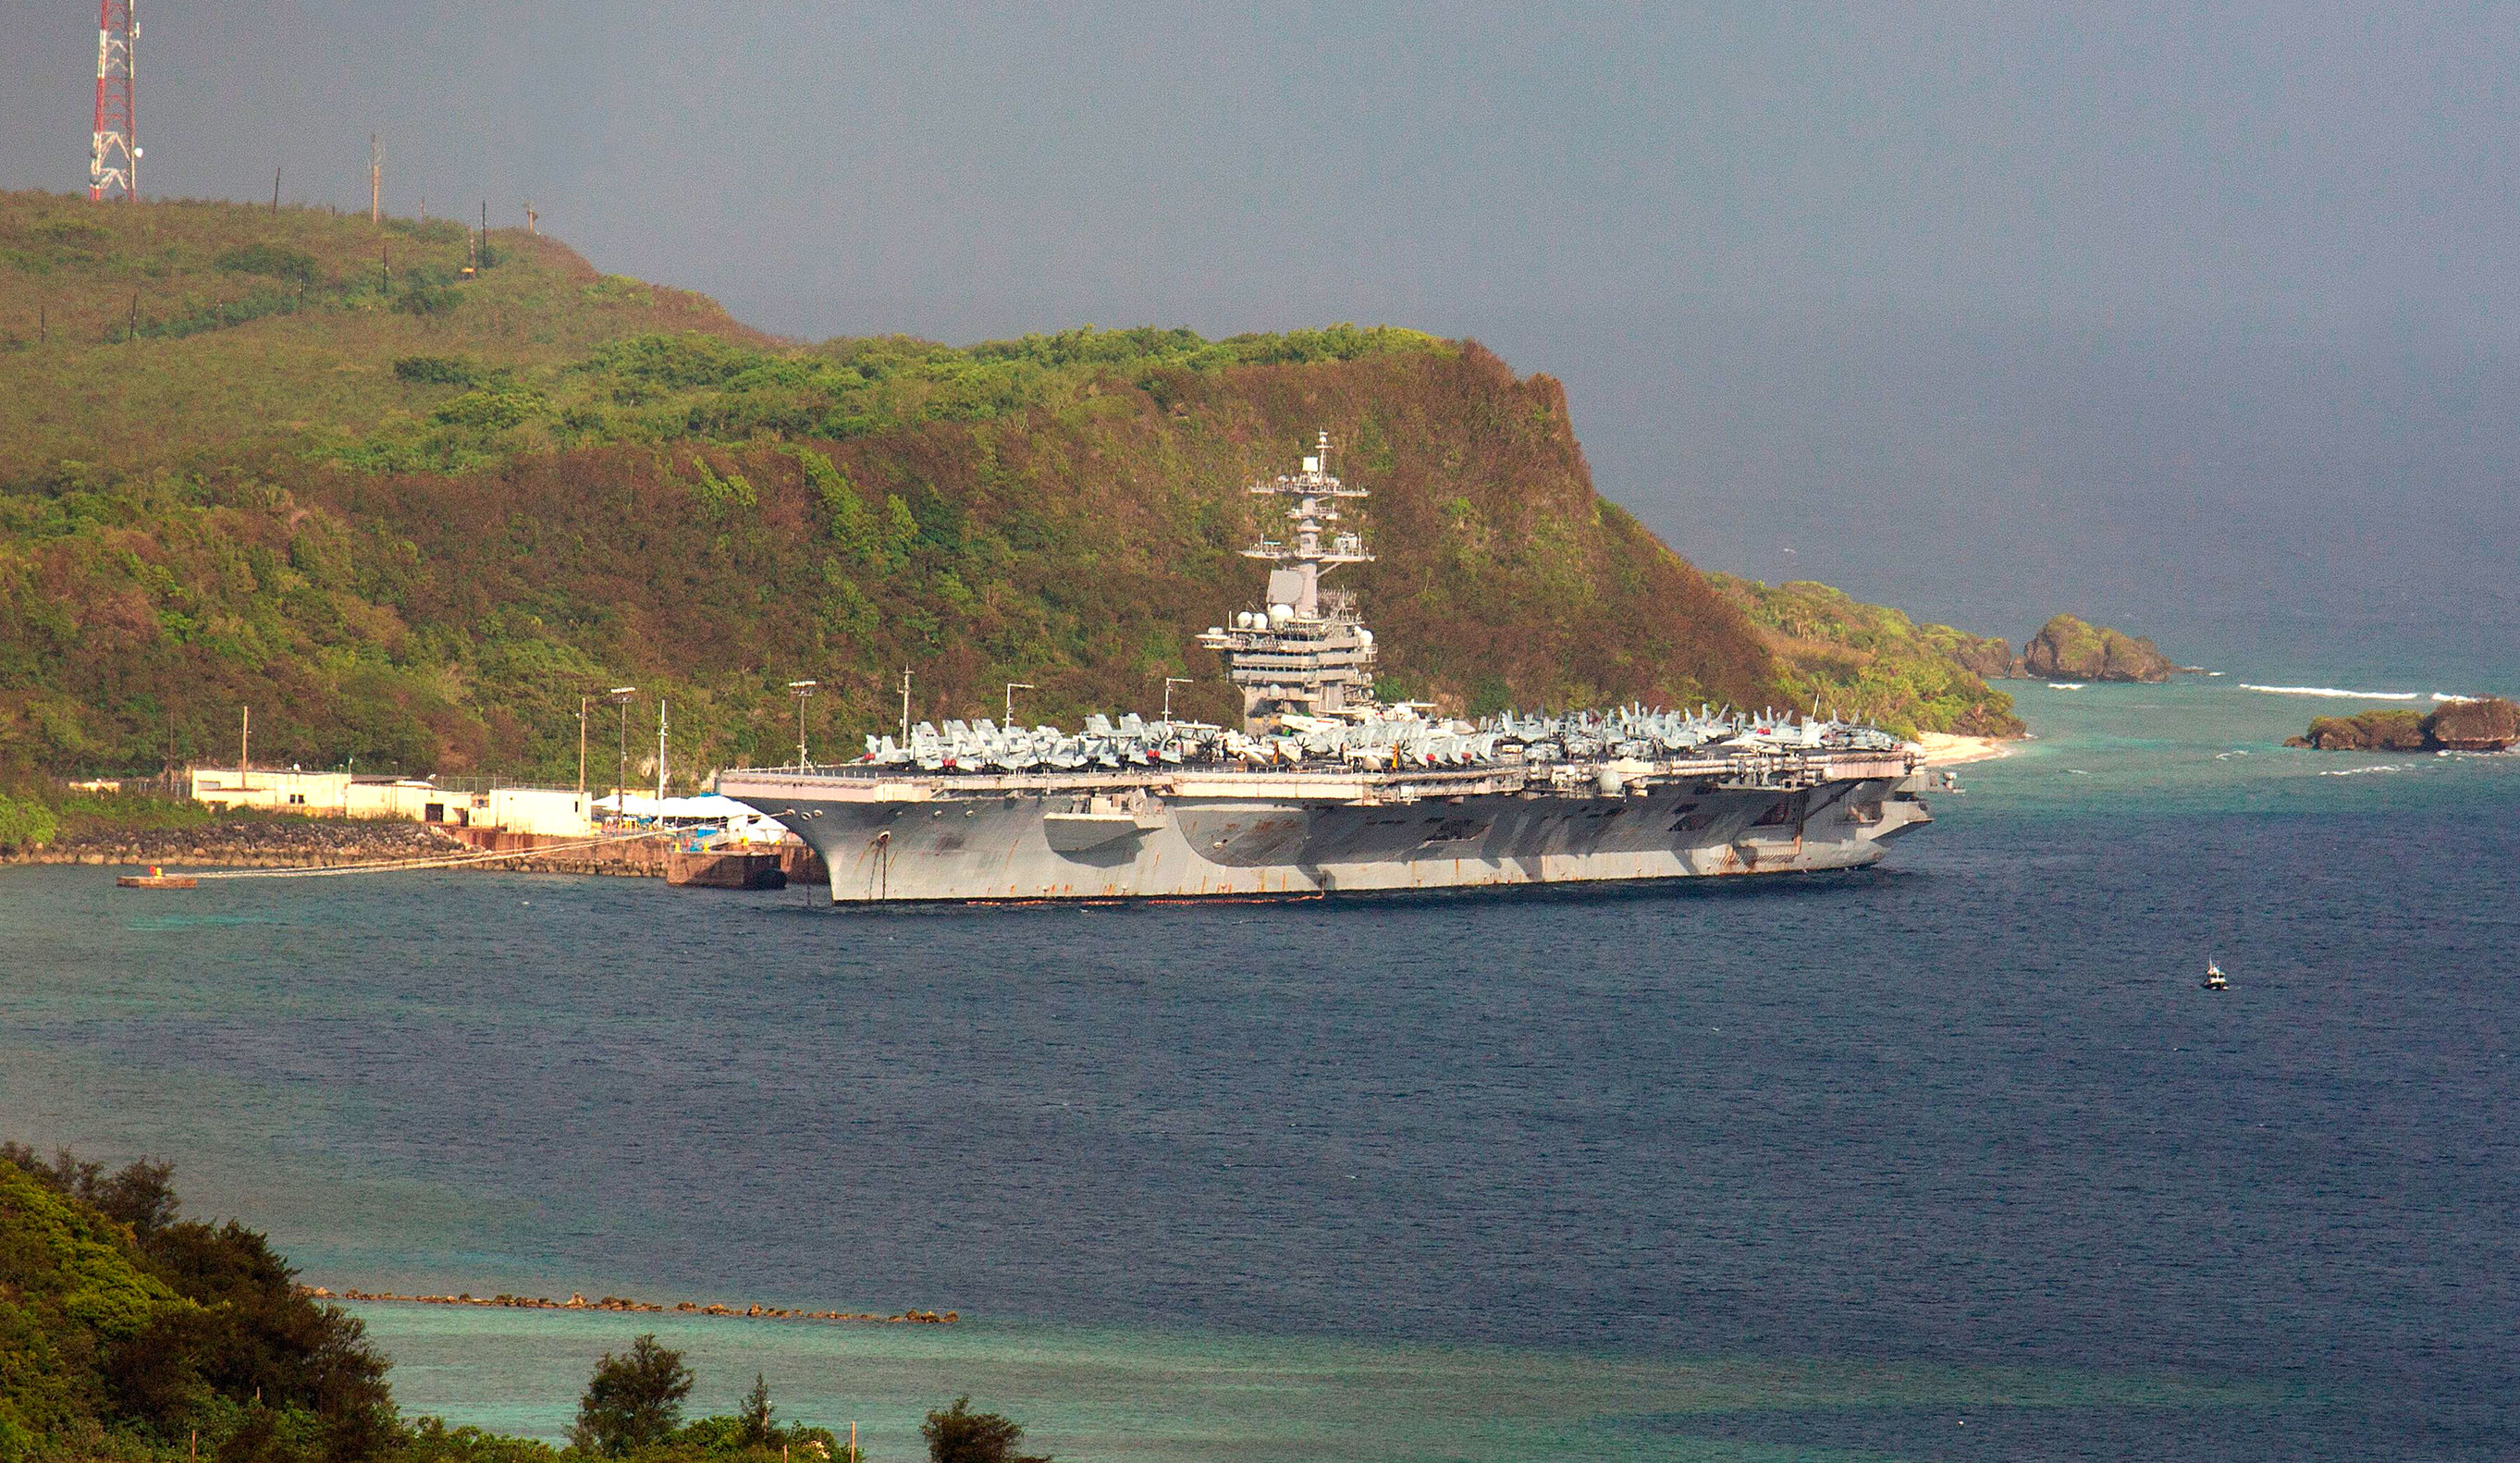 The aircraft carrier USS Theodore Roosevelt, docked at Naval Base Guam on April 27.